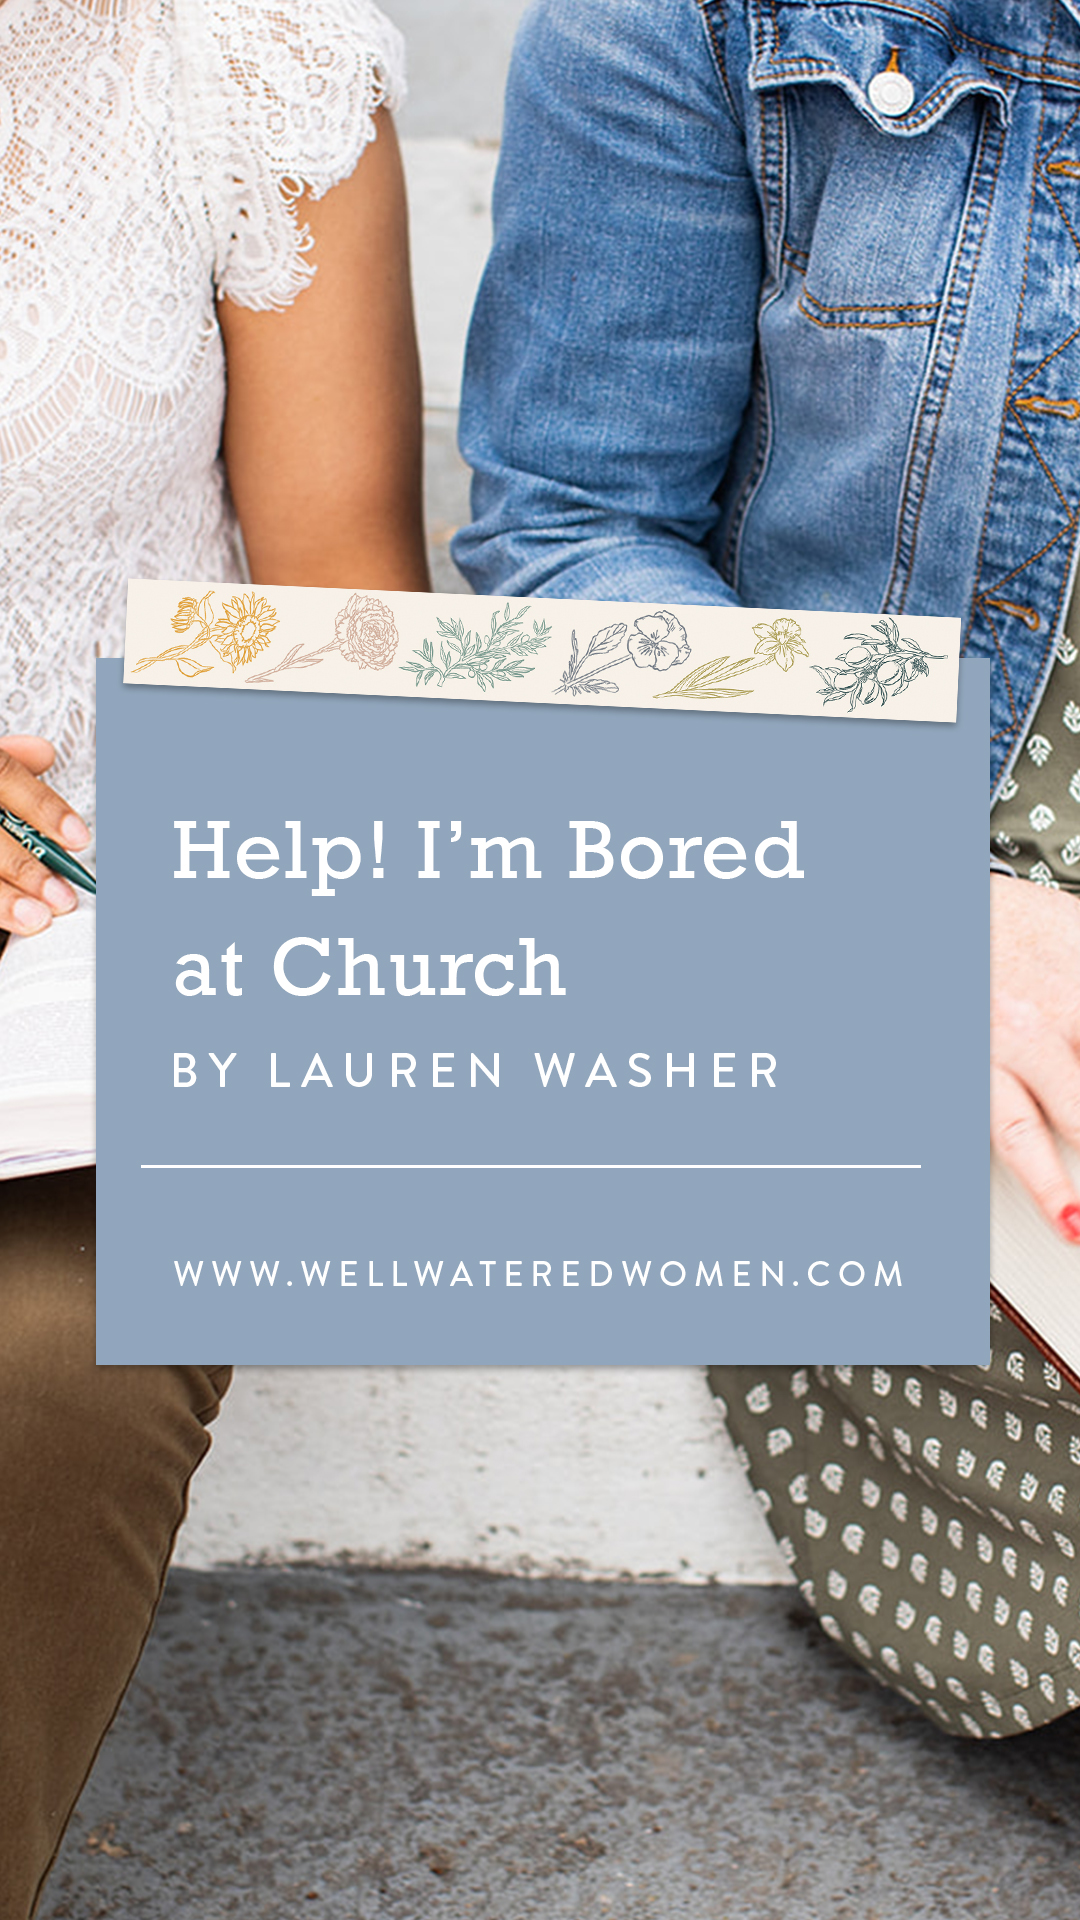 Help! I'm Bored at Church – An Article by Well-Watered Women